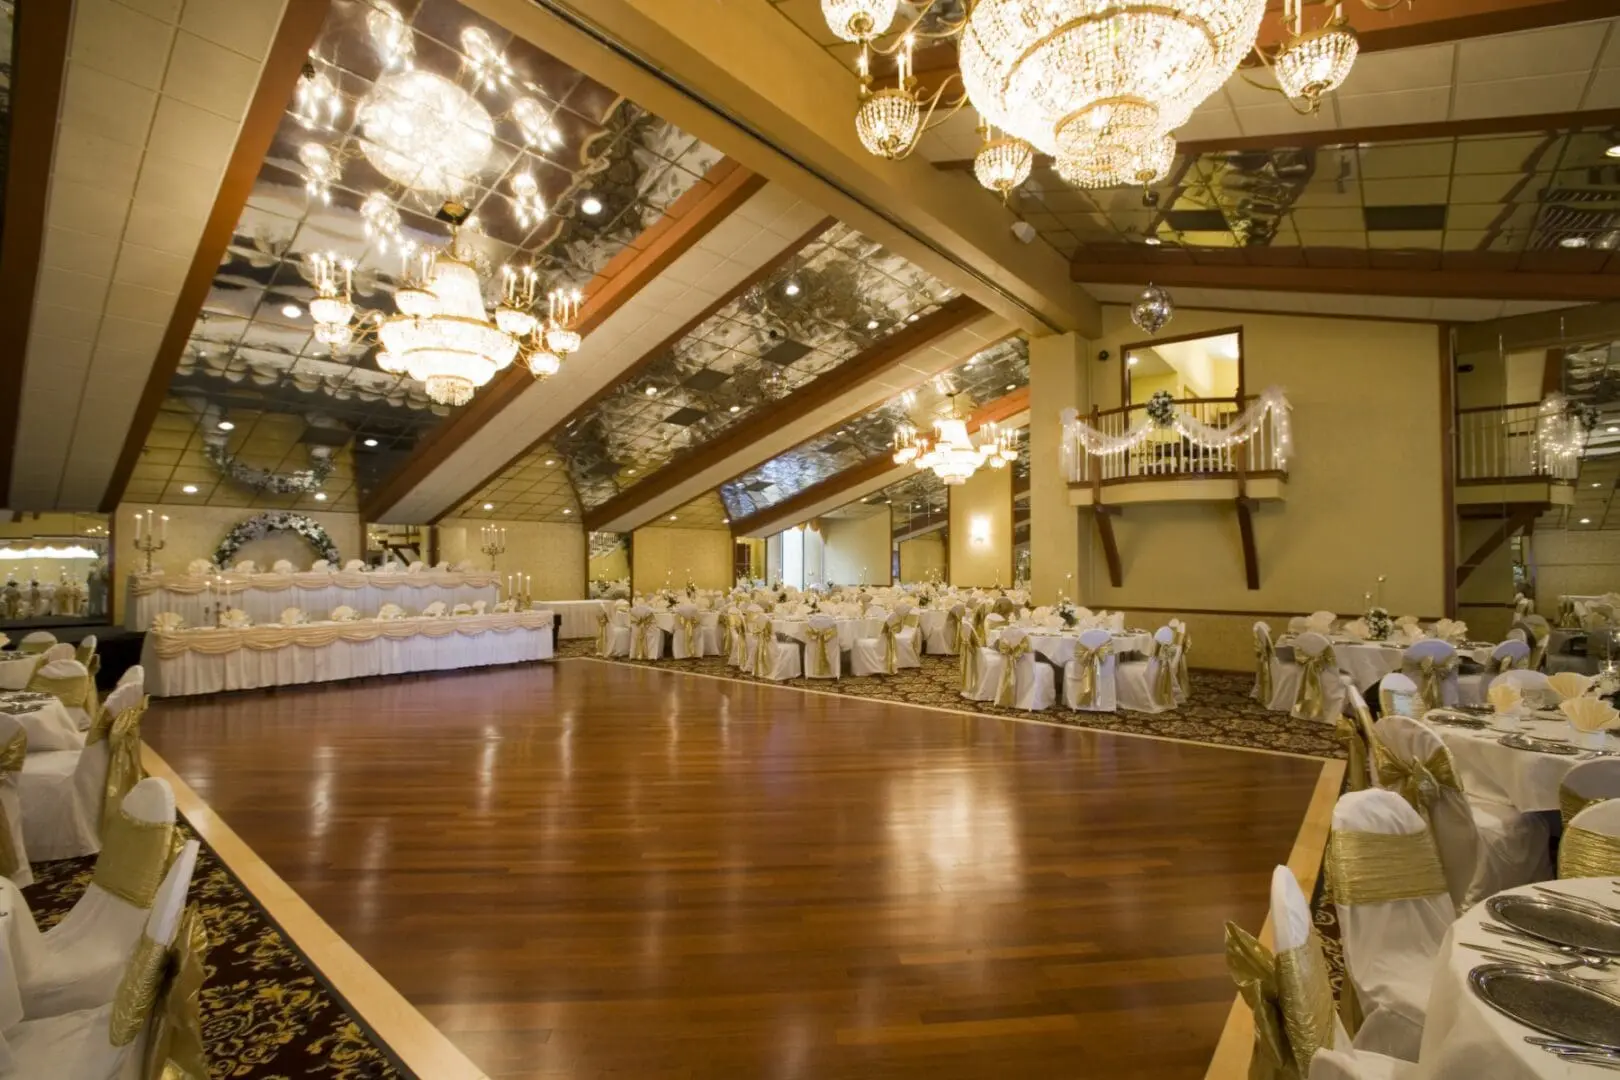 A large room with many chairs and tables